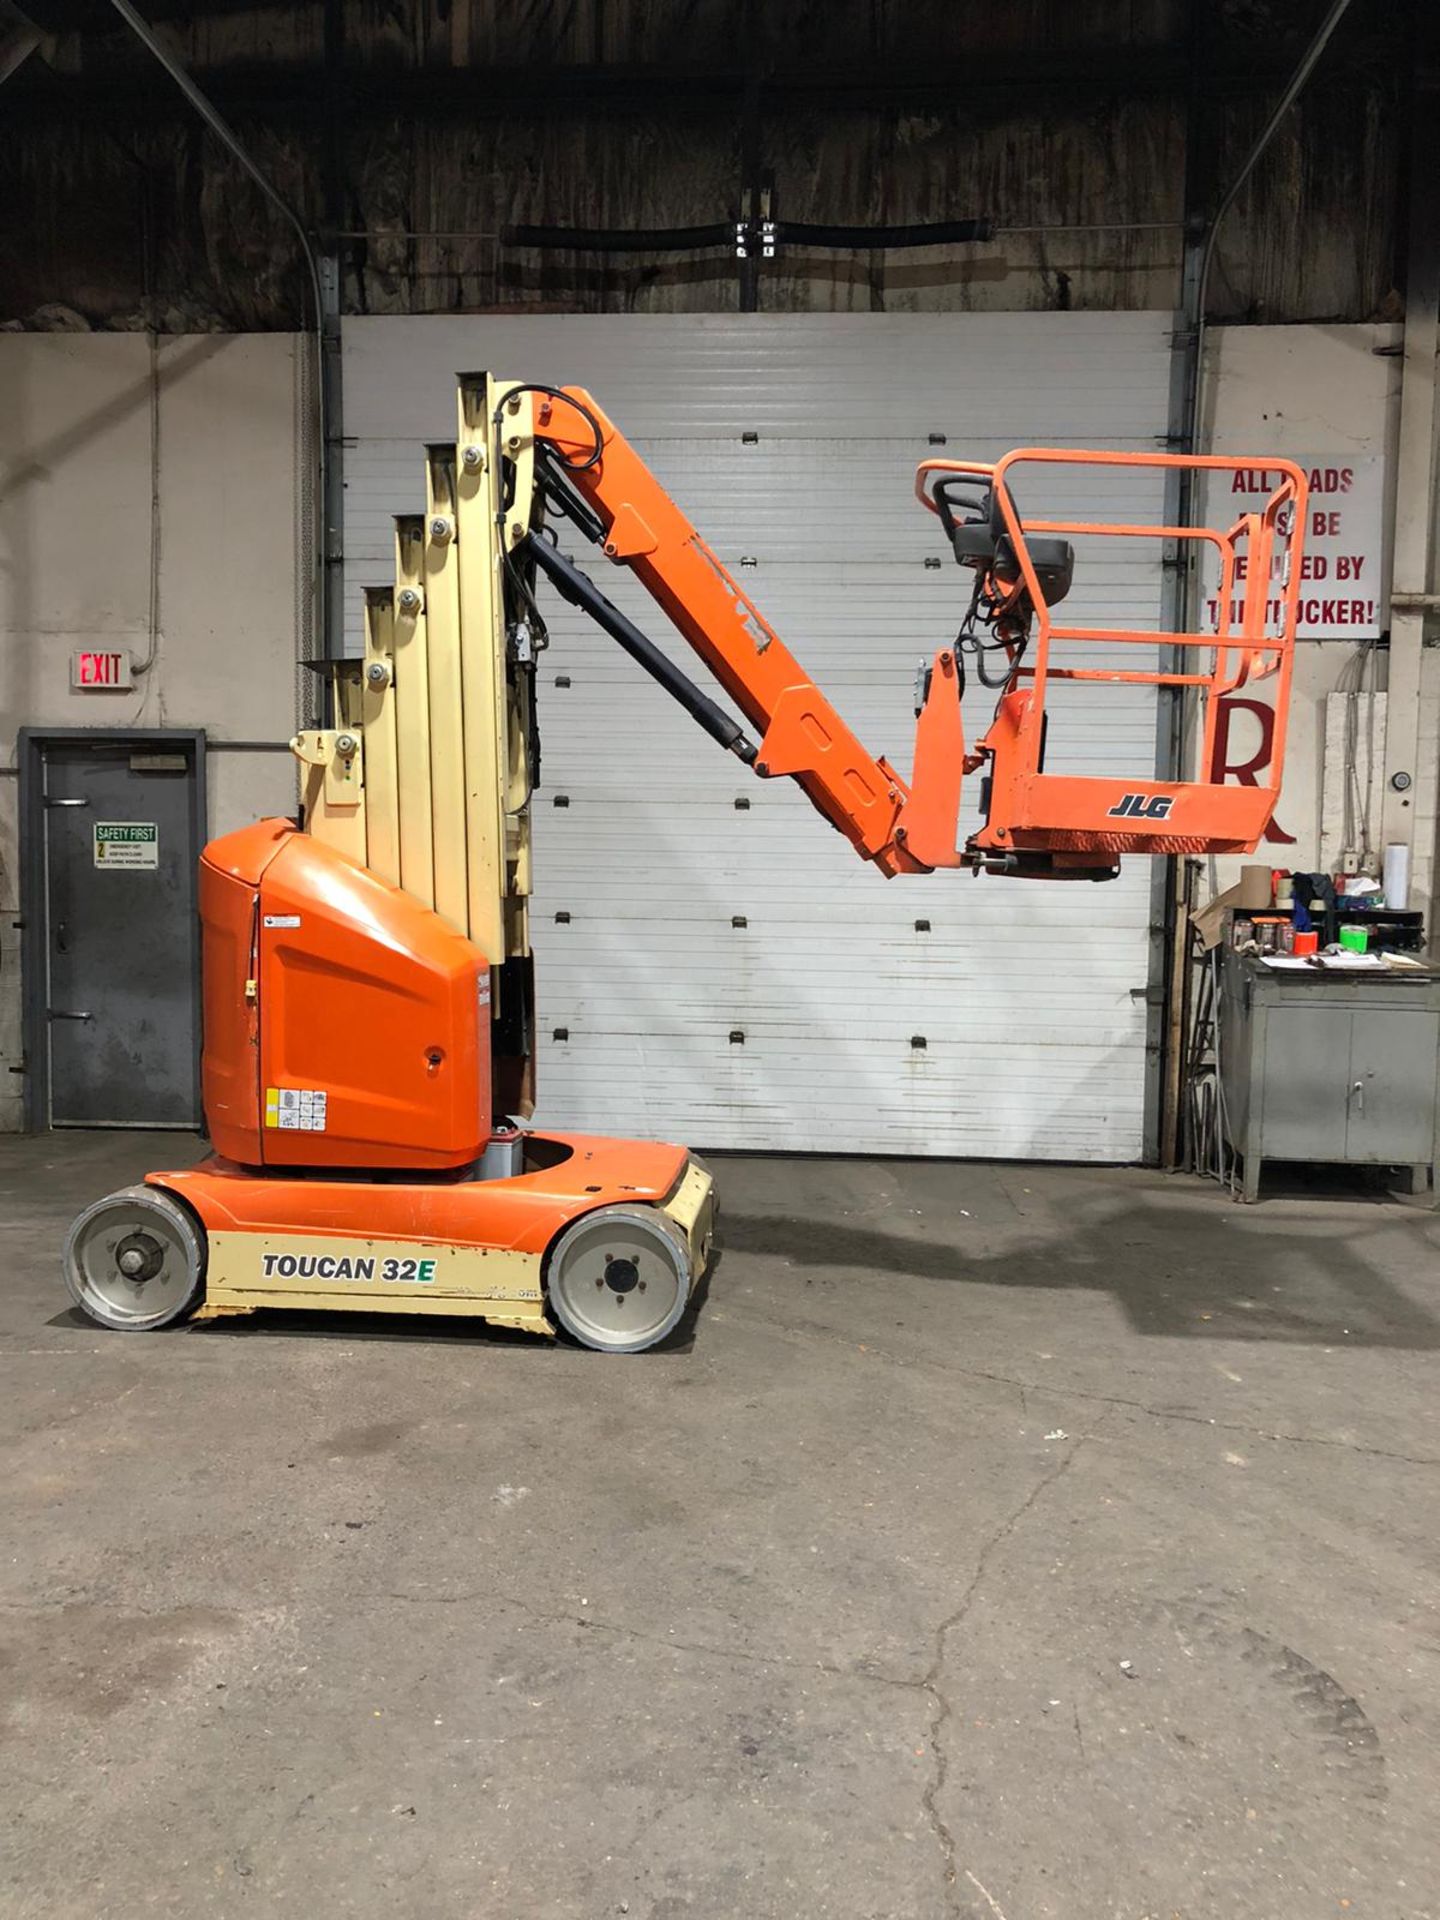 2014 JLG 32E Toucan Mast Boom Lift - Electric 48V with Low Hours with 32' Platform Height and 500lbs - Image 6 of 7